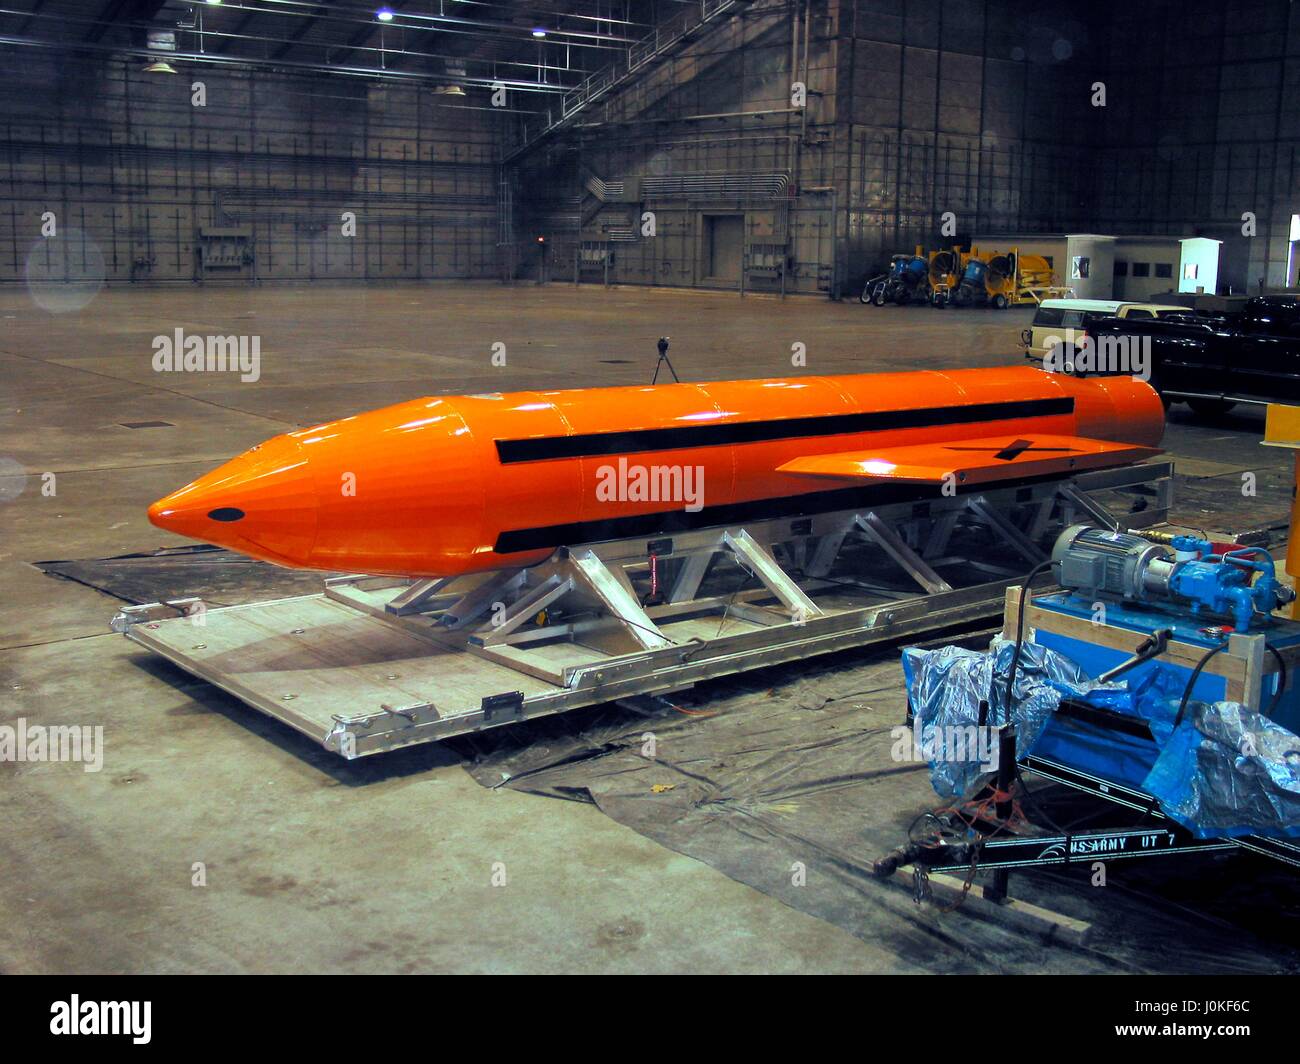 A U.S. Air Force Massive Ordnance Air Blast (MOAB) bomb is prepared for testing at the Eglin Air Force Armament Center March 11, 2003 in Valparaiso, Florida.  The MOAB is a precision-guided munition weighing 21,500 pounds and is the largest non-nuclear conventional weapon in existence. Stock Photo